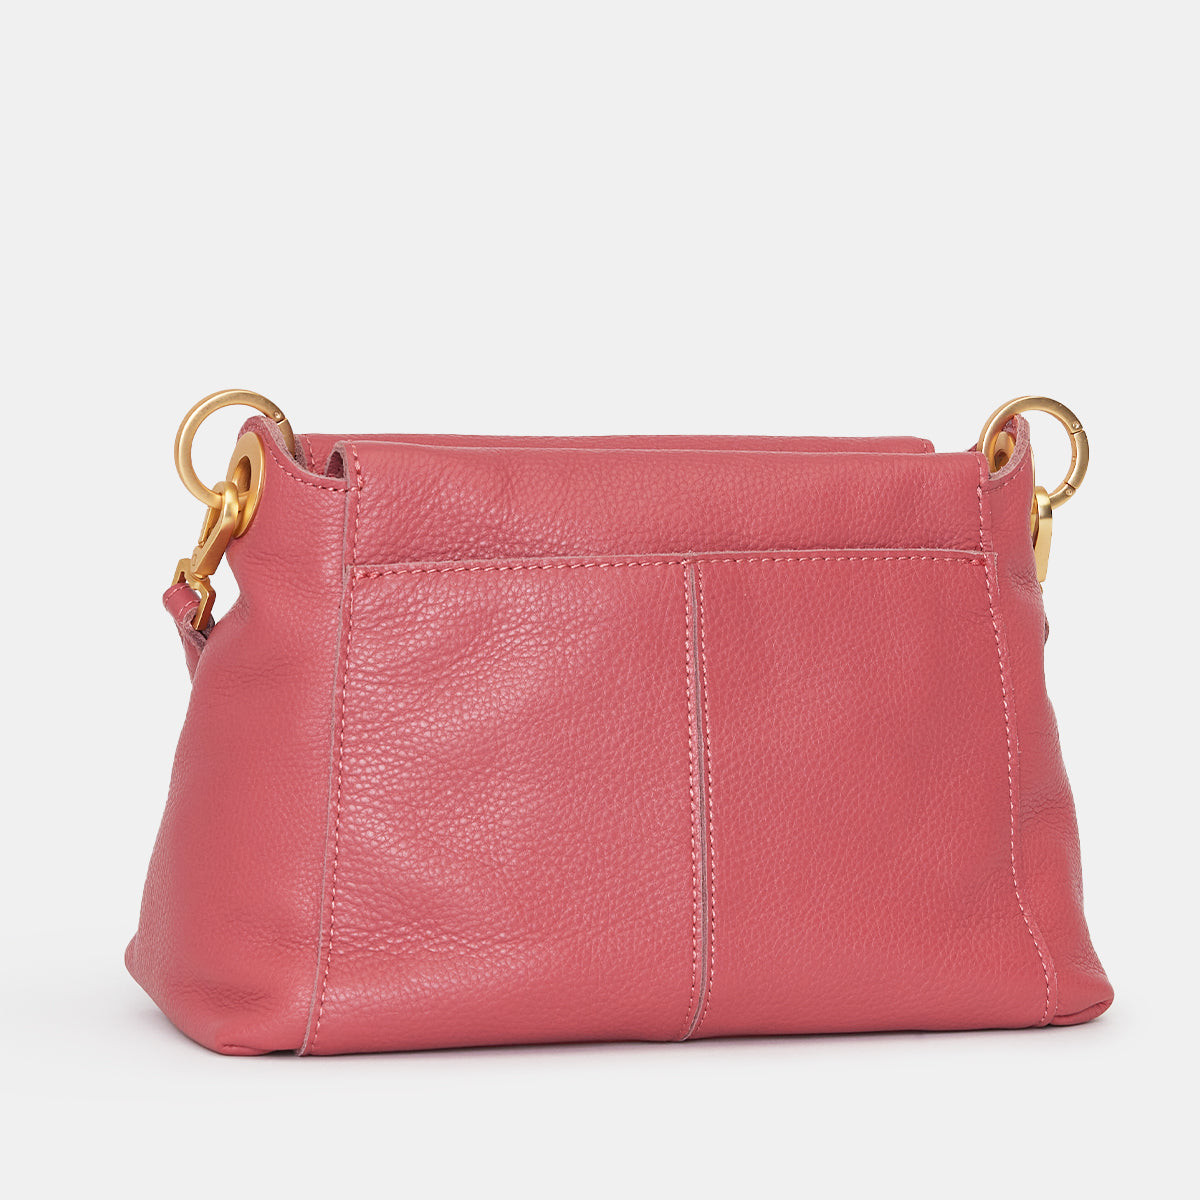 Fossil Karli Leather Crossbody Bag in Pink